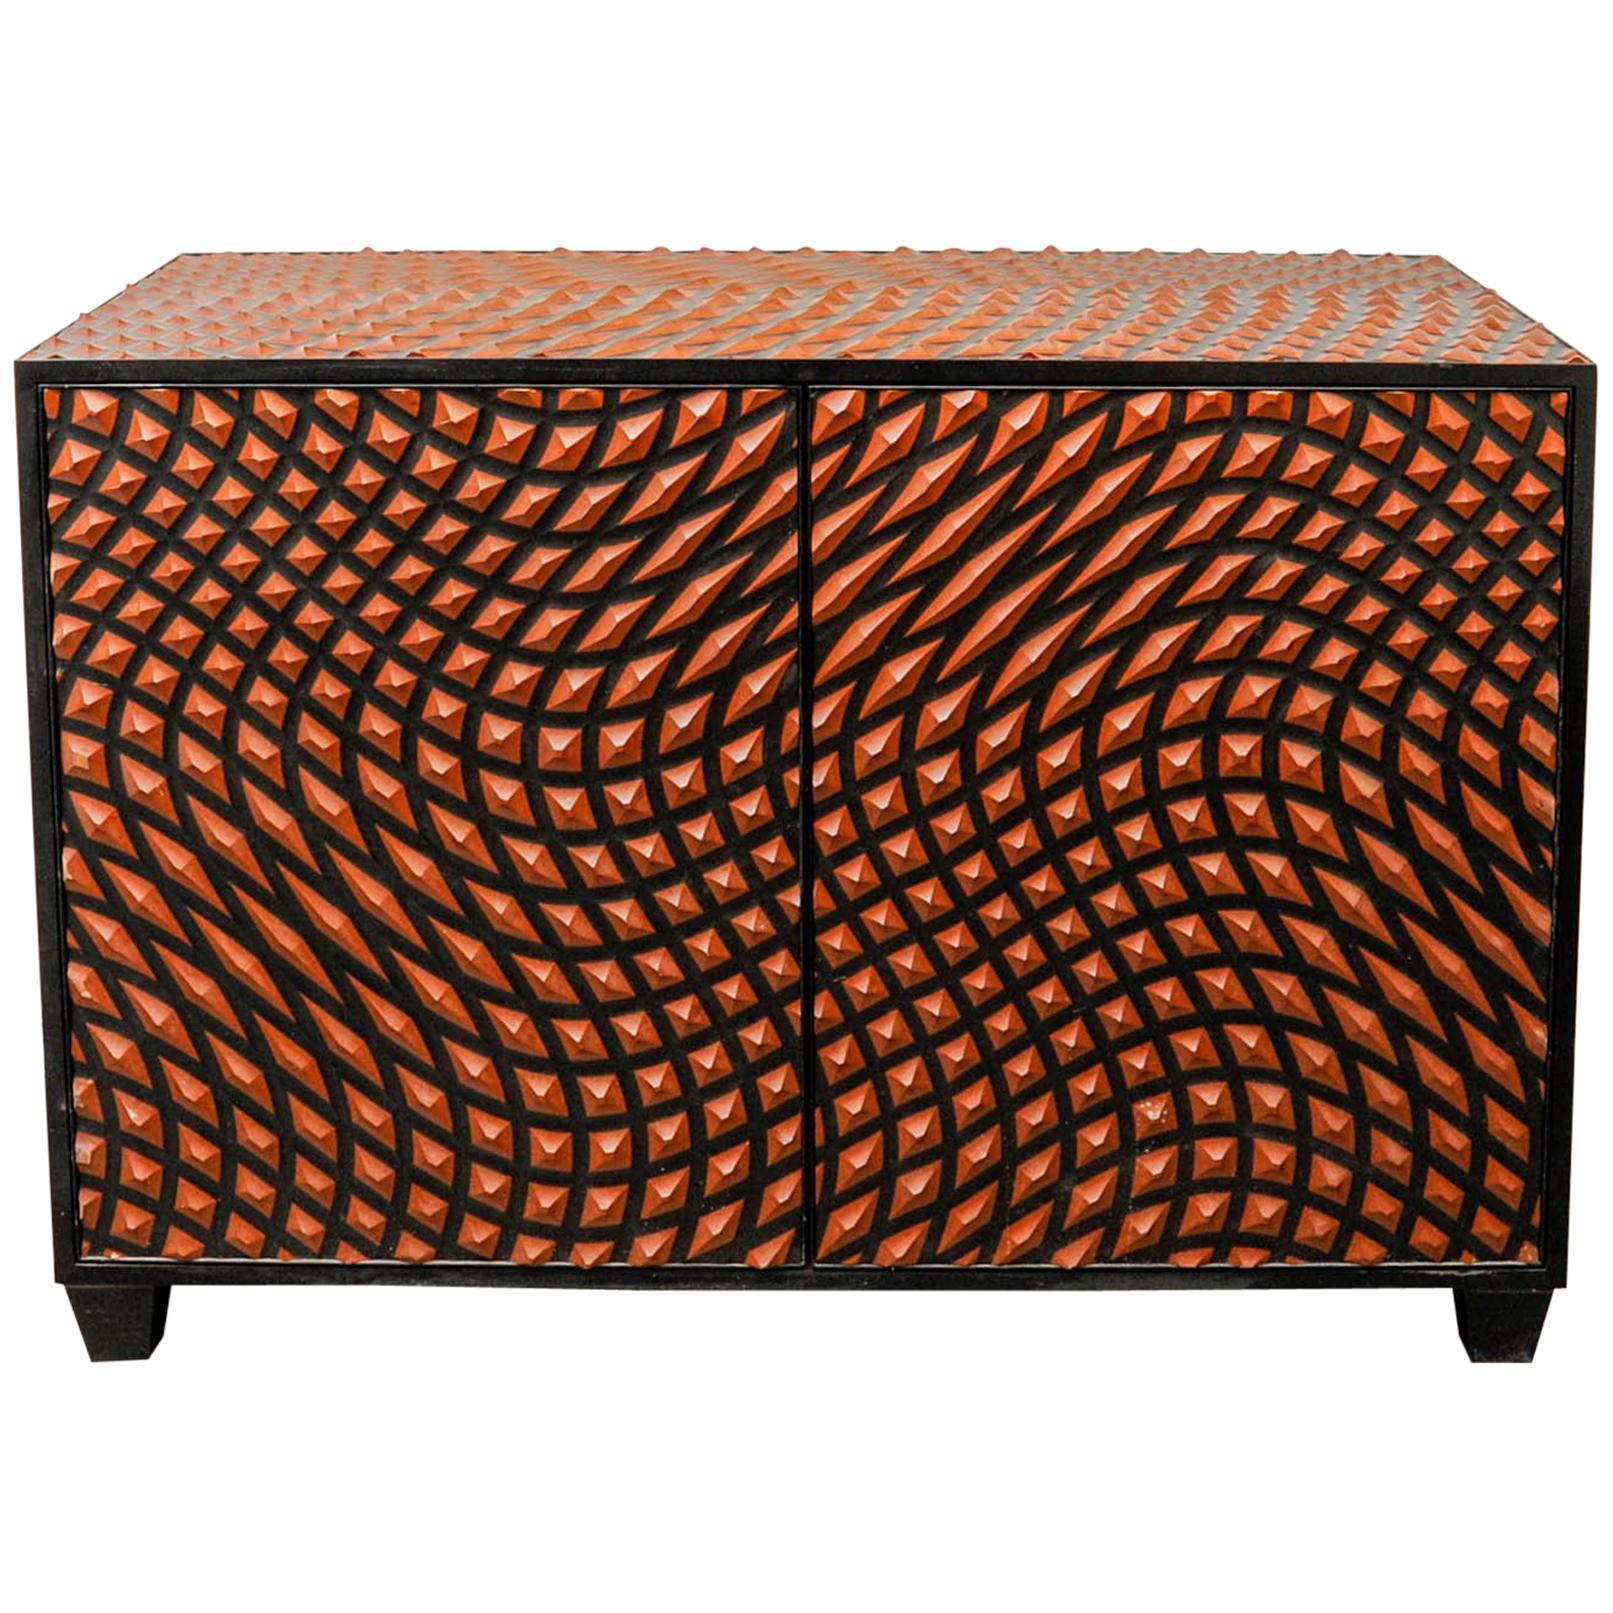 One of a Kind Sideboard